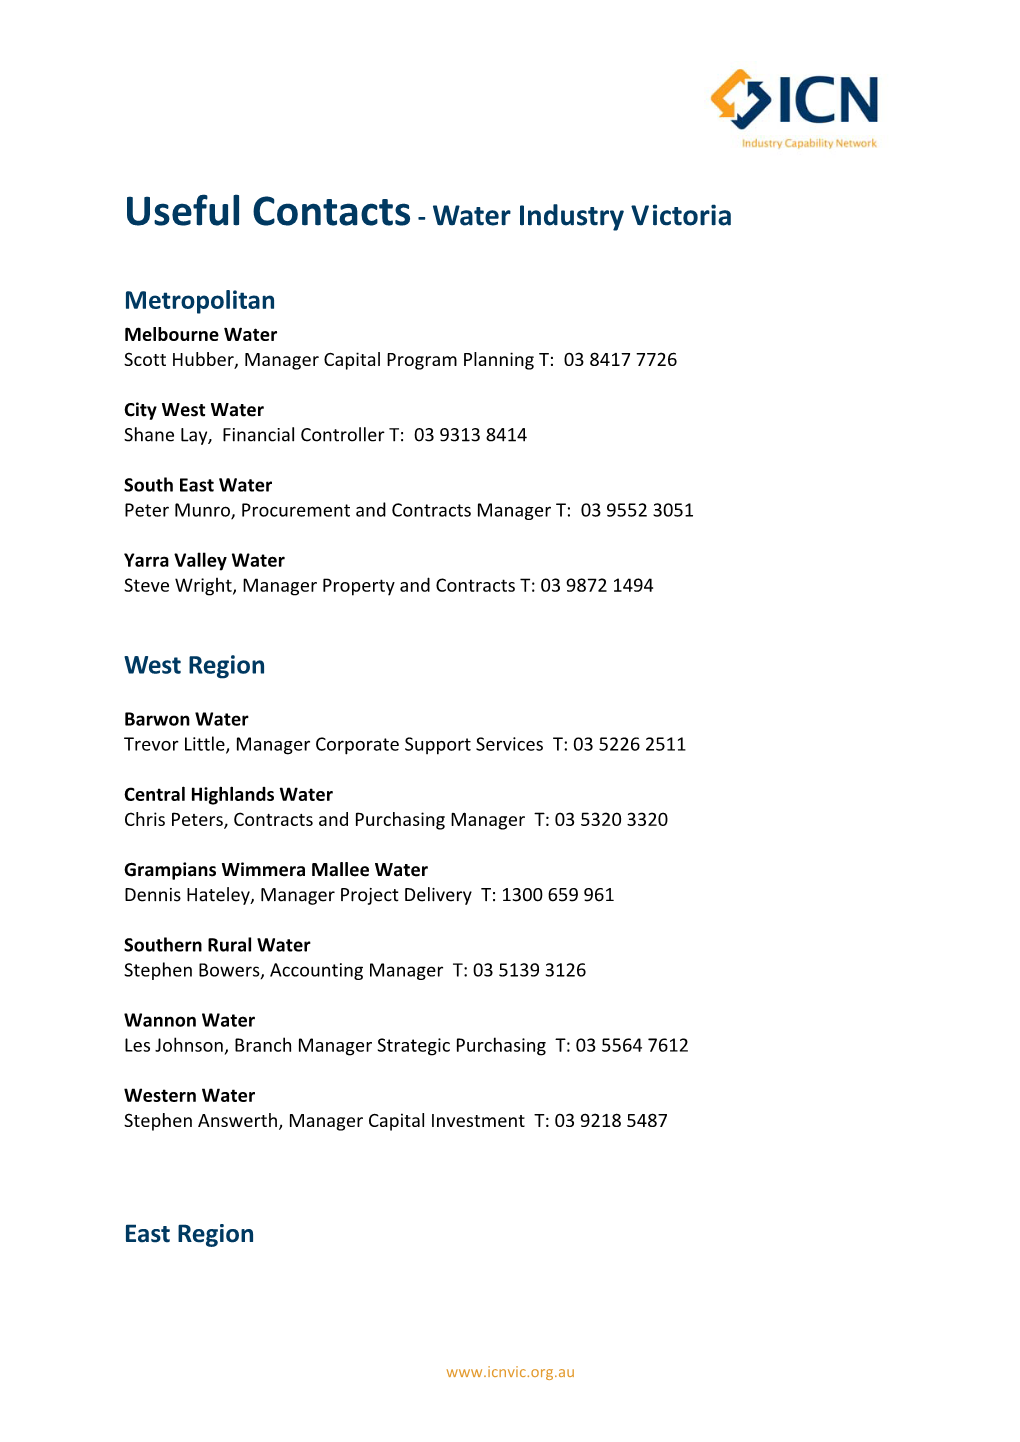 Useful Contacts- Water Industry Victoria